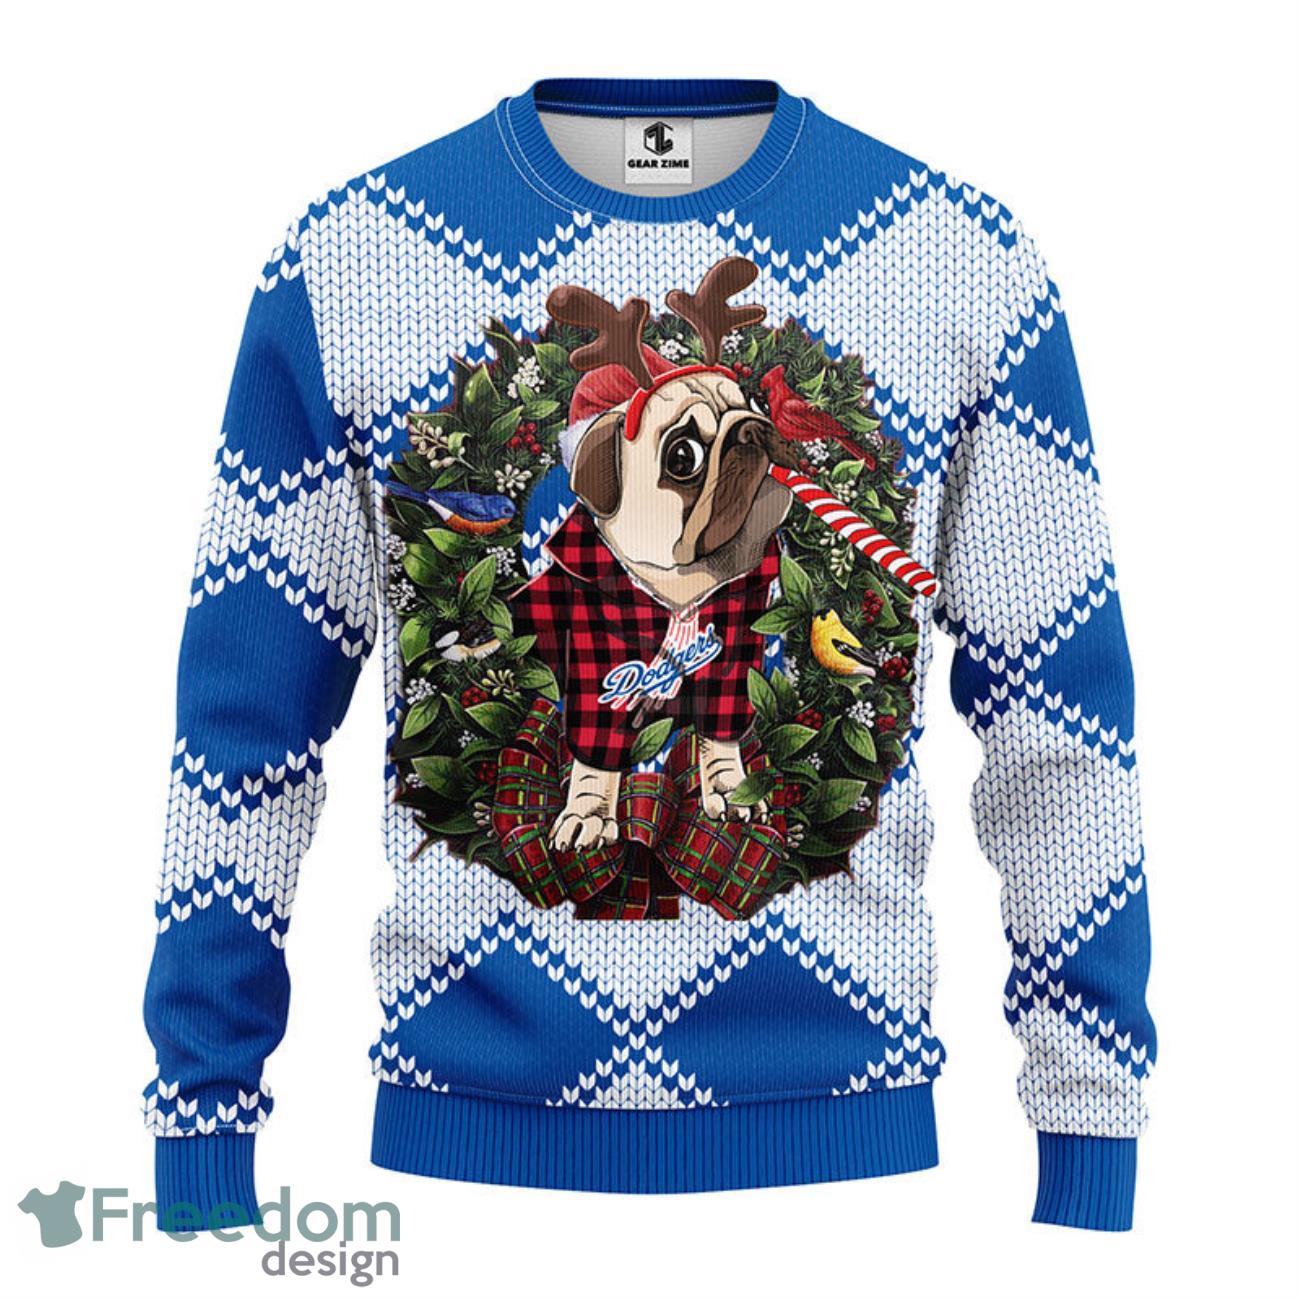 Top-selling item] Mickey Mouse Los Angeles Dodgers Ugly Christmas Sweater